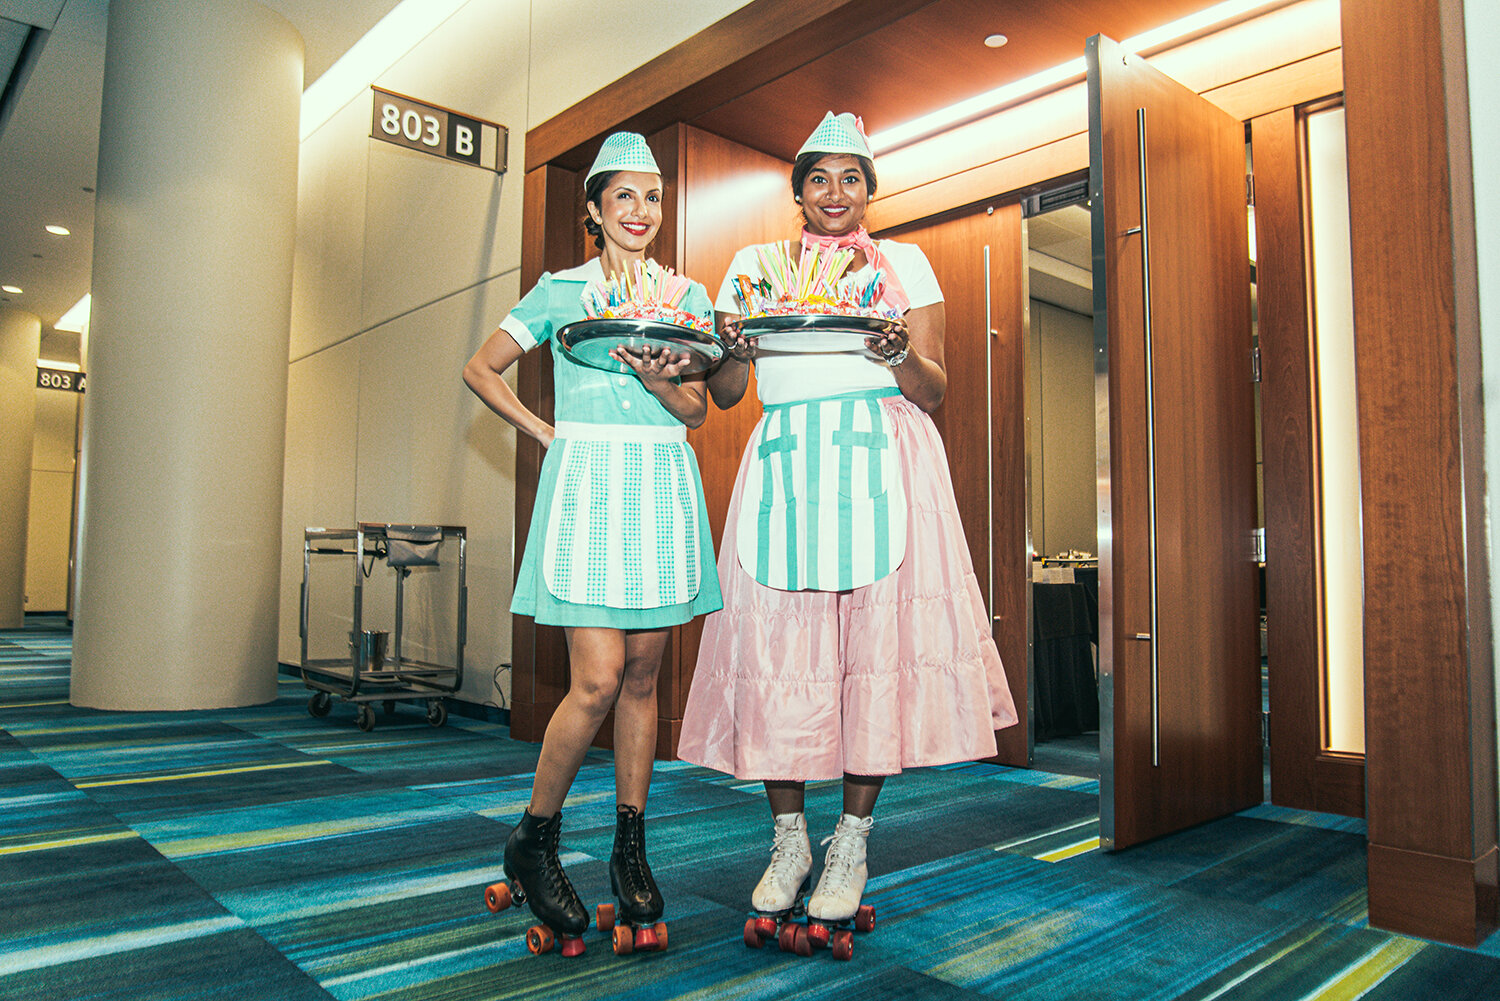 From improv actors to costumed char-actors we take an unconventional approach to greeting your guests.